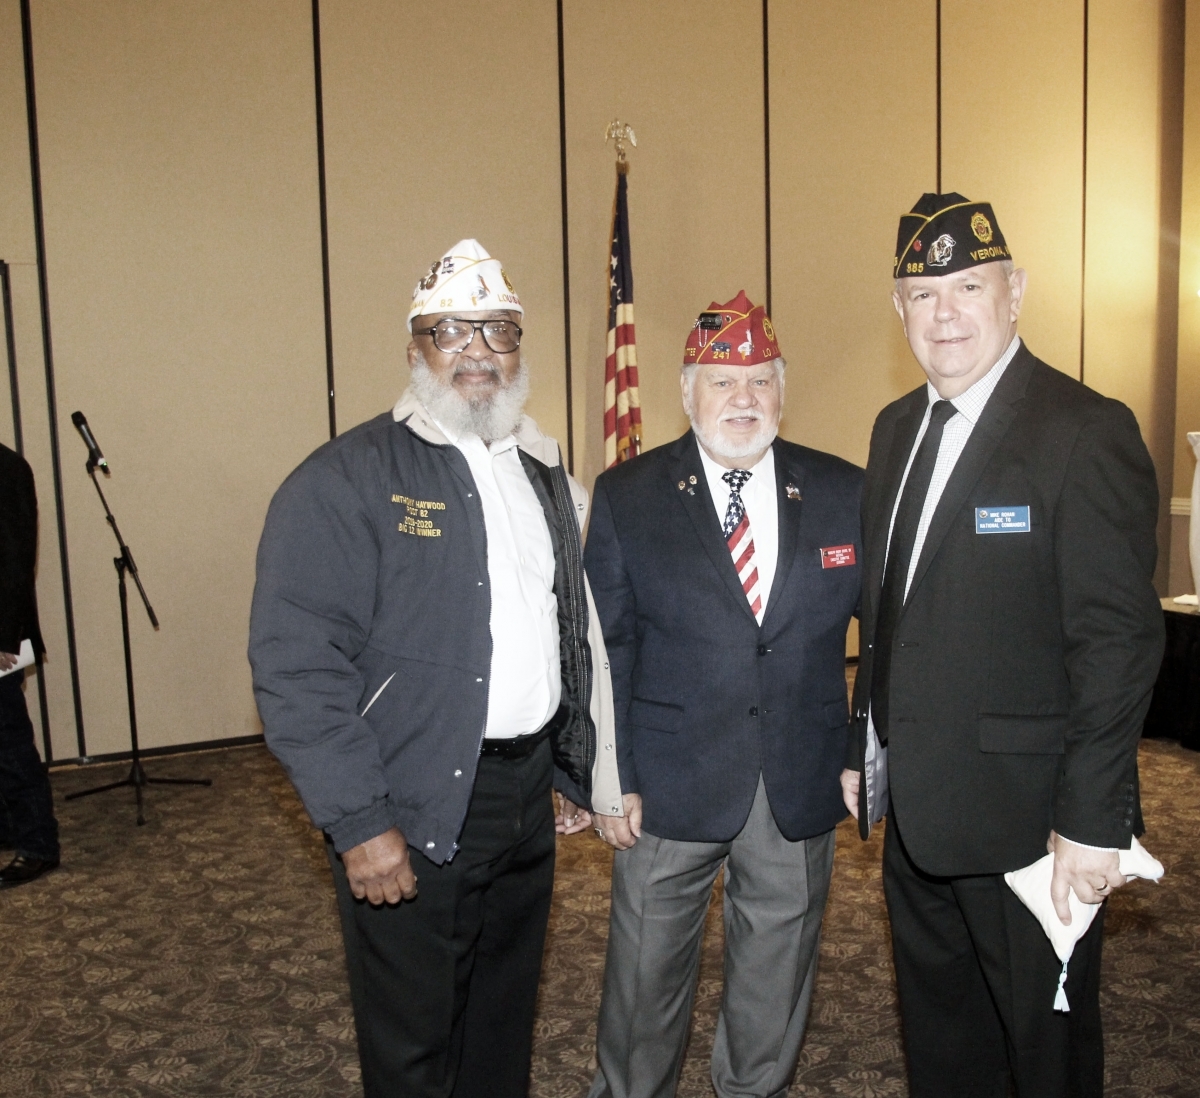 Louisiana Mid Winter Conference held in Alexandria La. with National Commander present. 